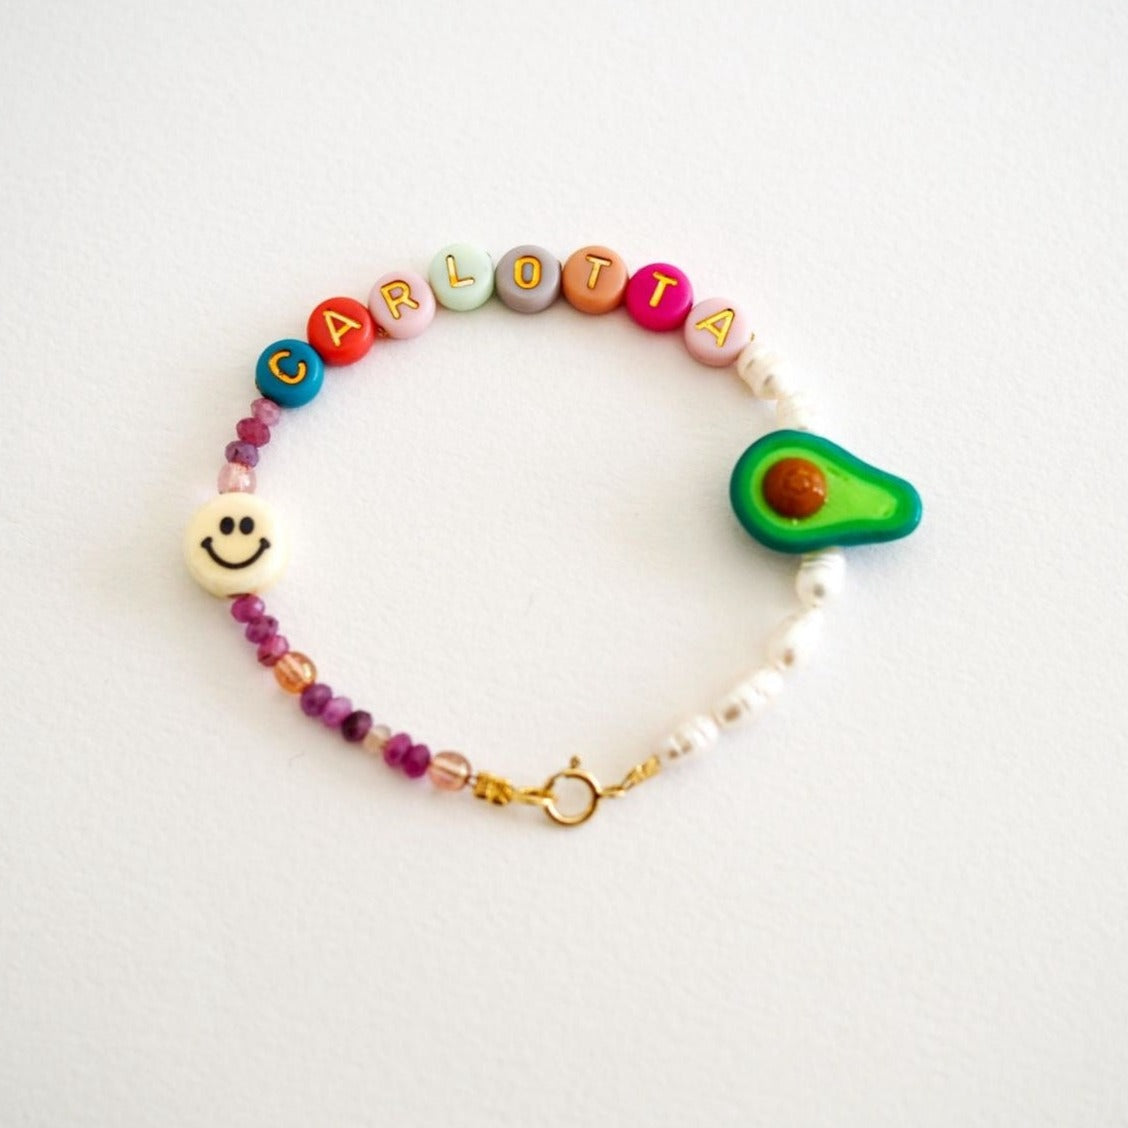 Bracelet with message